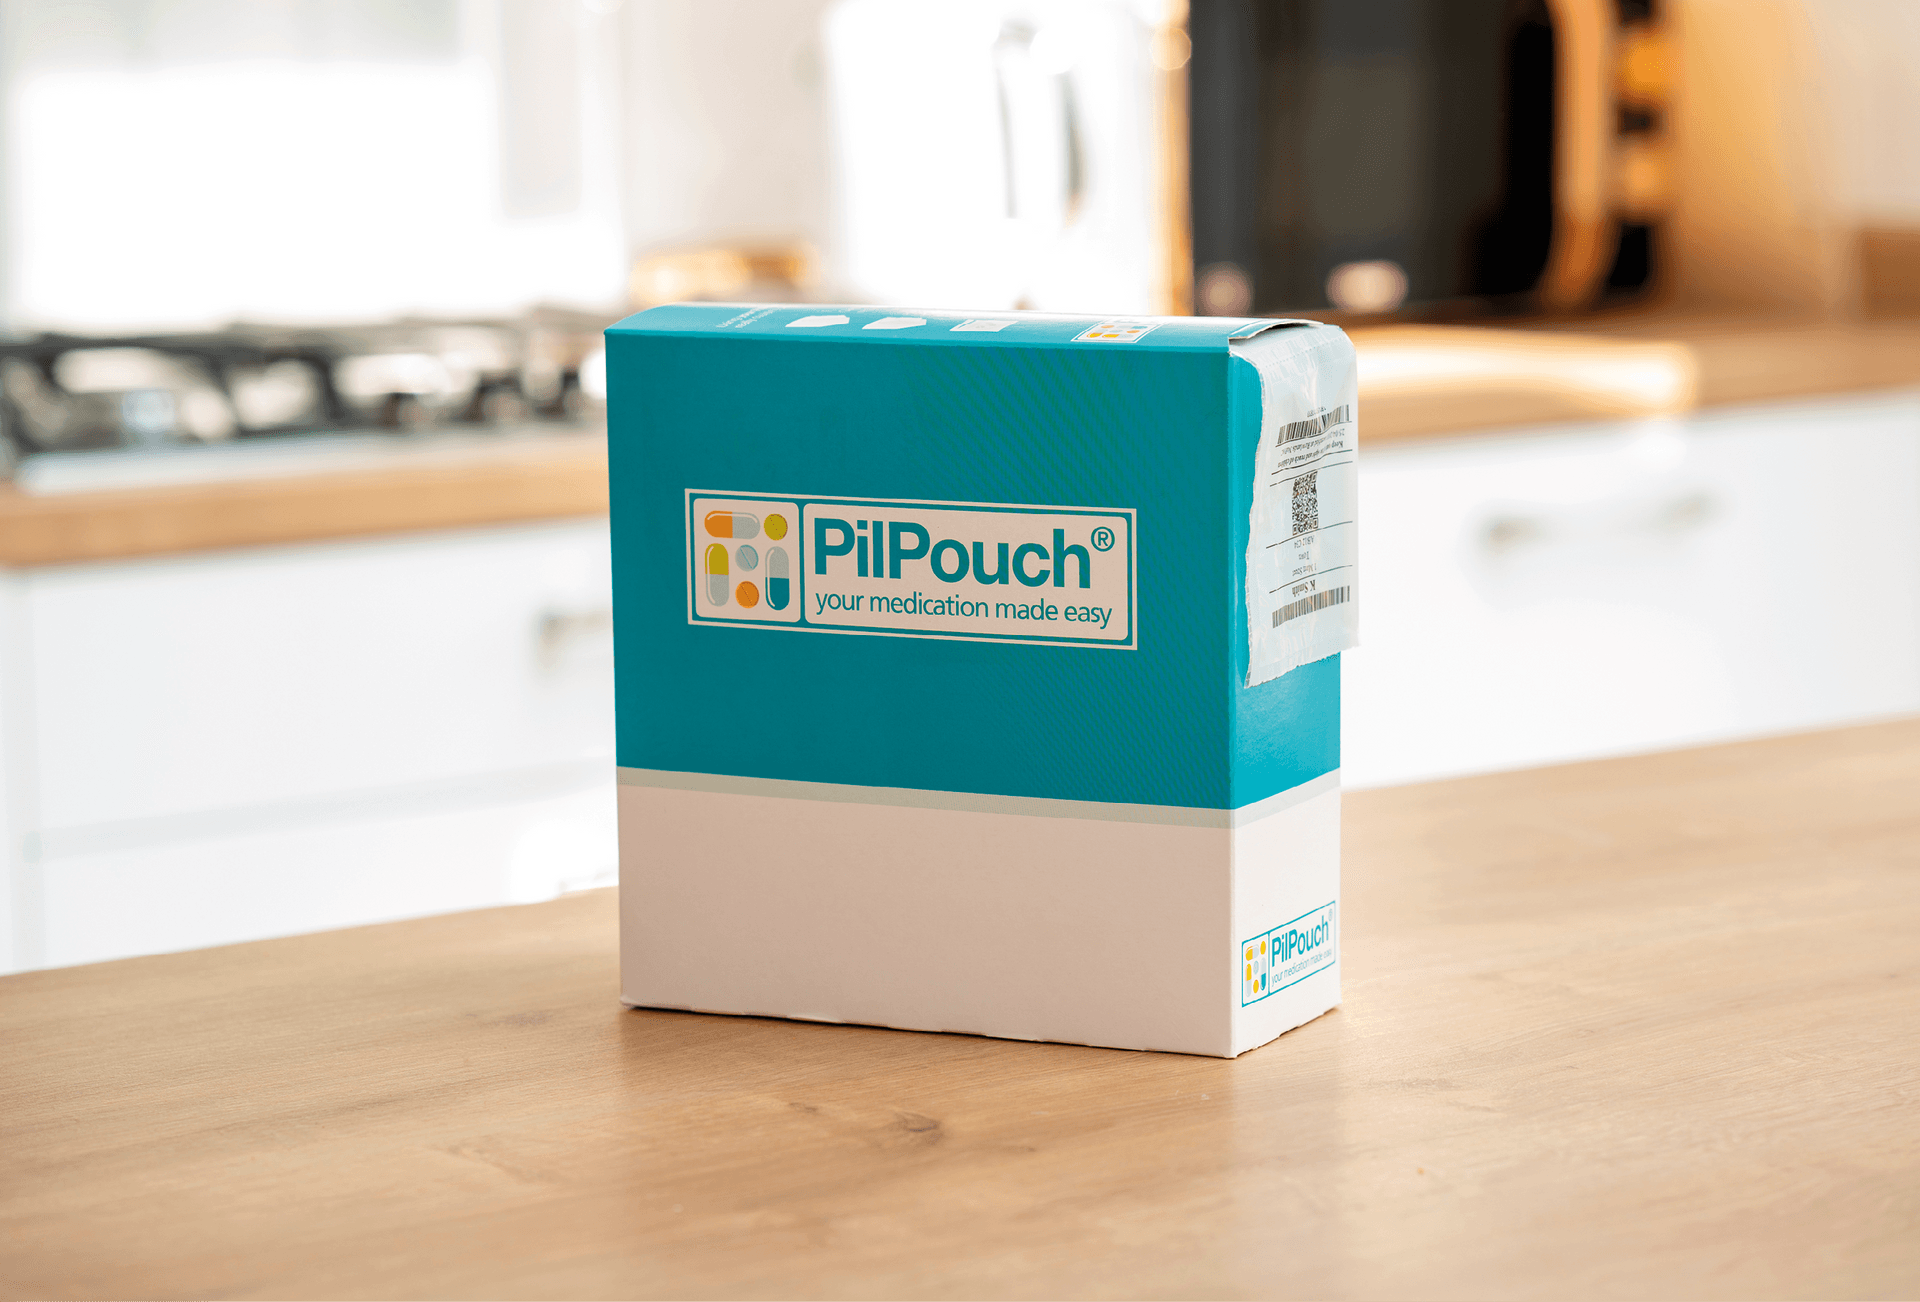 pilpouch box on counter